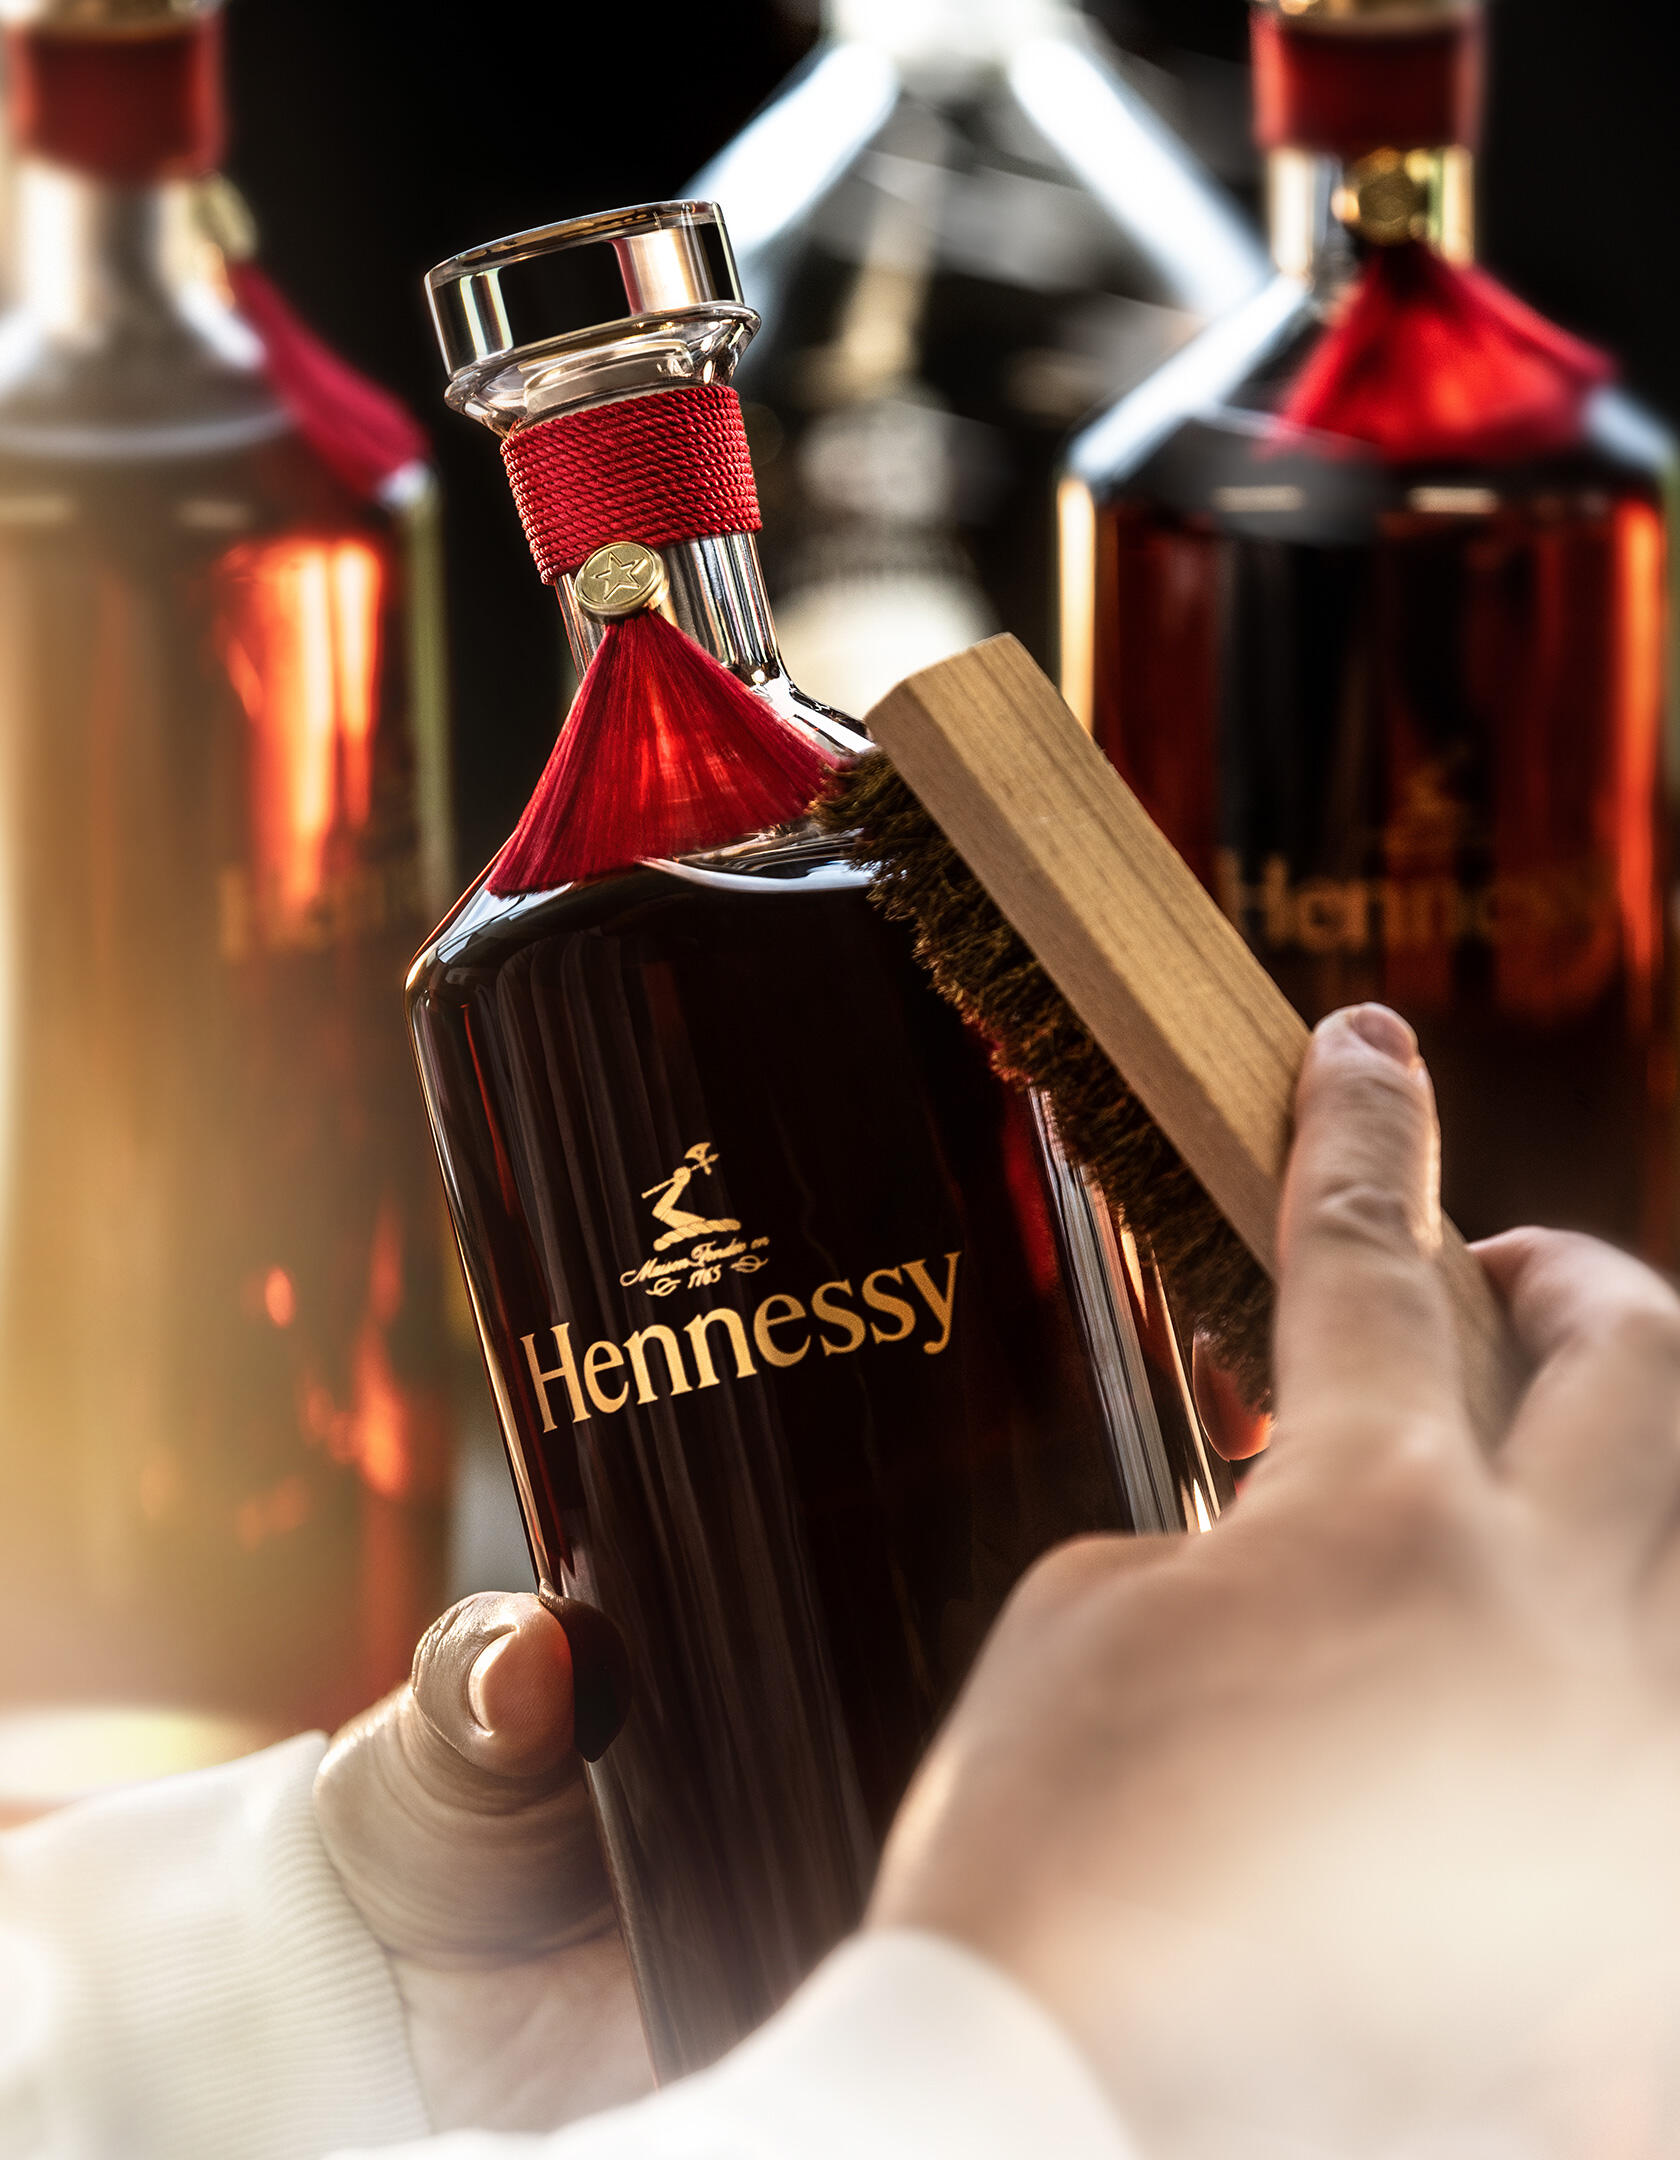 Editions rares d'Hennessy